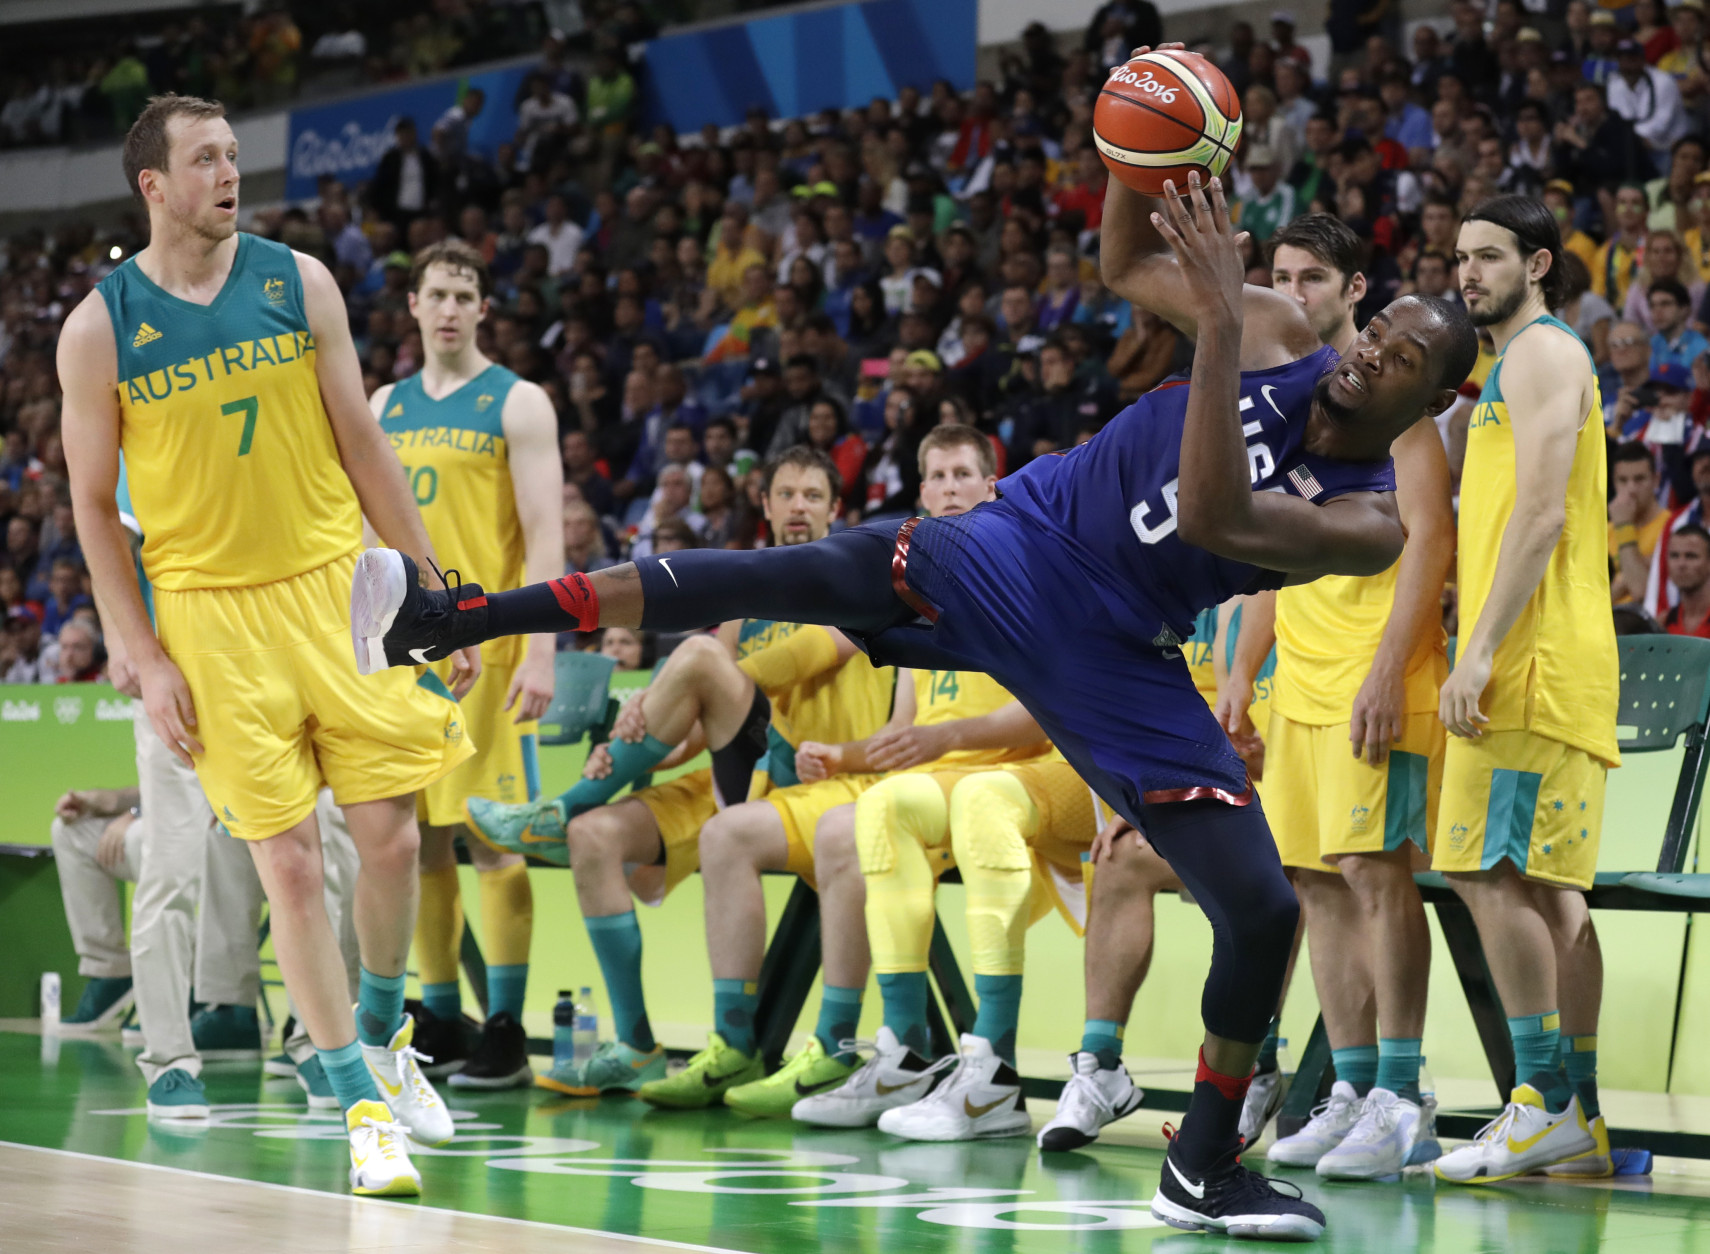 United States' Kevin Durant (5) is fouled by Australia's Joe Ingles (7) during a basketball game at the 2016 Summer Olympics in Rio de Janeiro, Brazil, Wednesday, Aug. 10, 2016. (AP Photo/Charlie Neibergall)